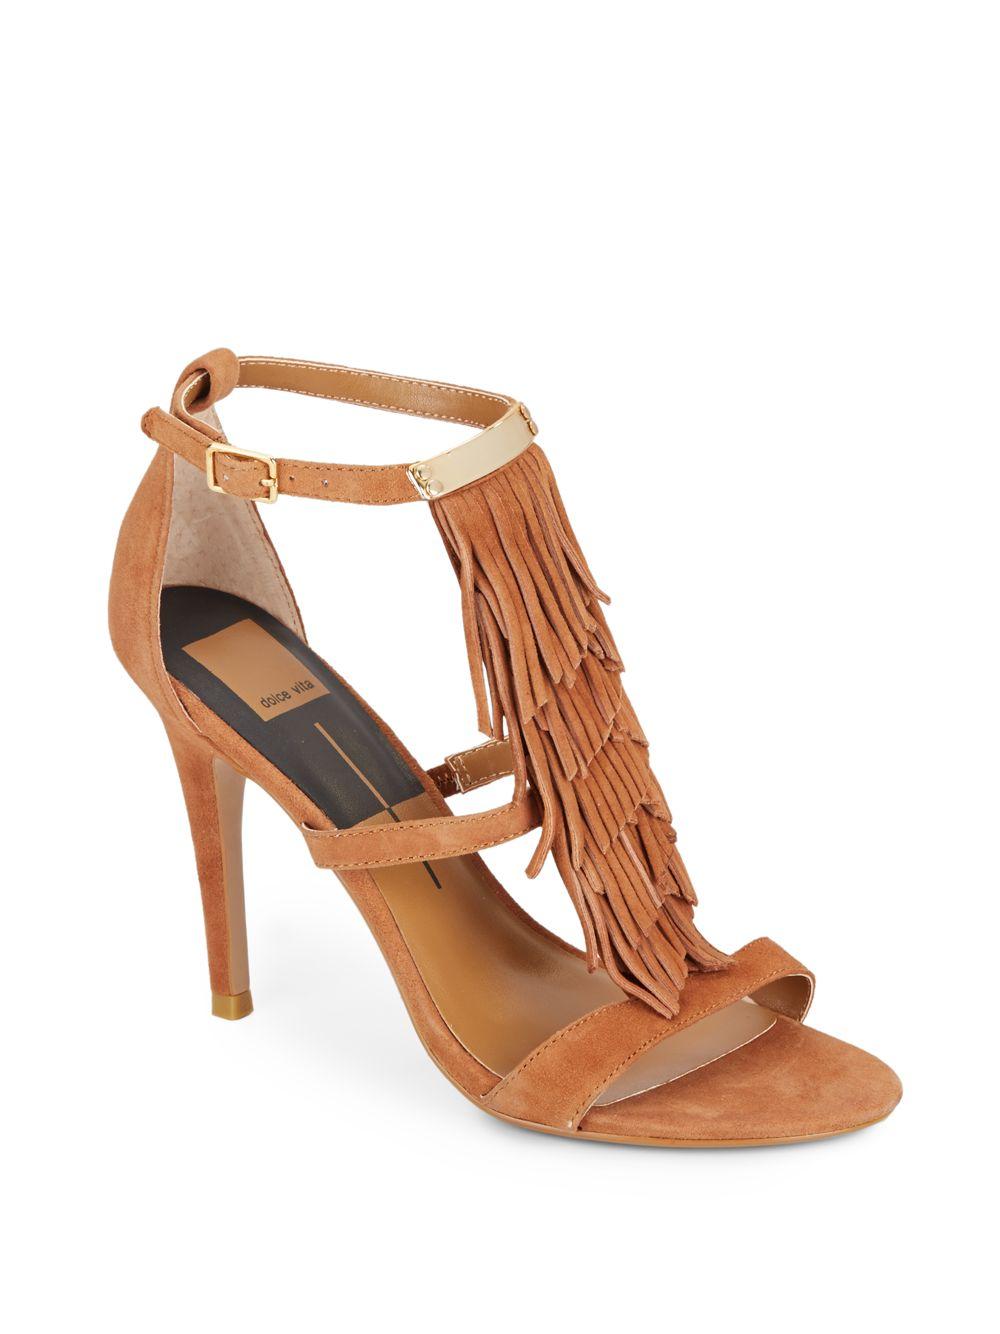 Dolce vita Michelle Fringed Suede Sandals in Natural | Lyst